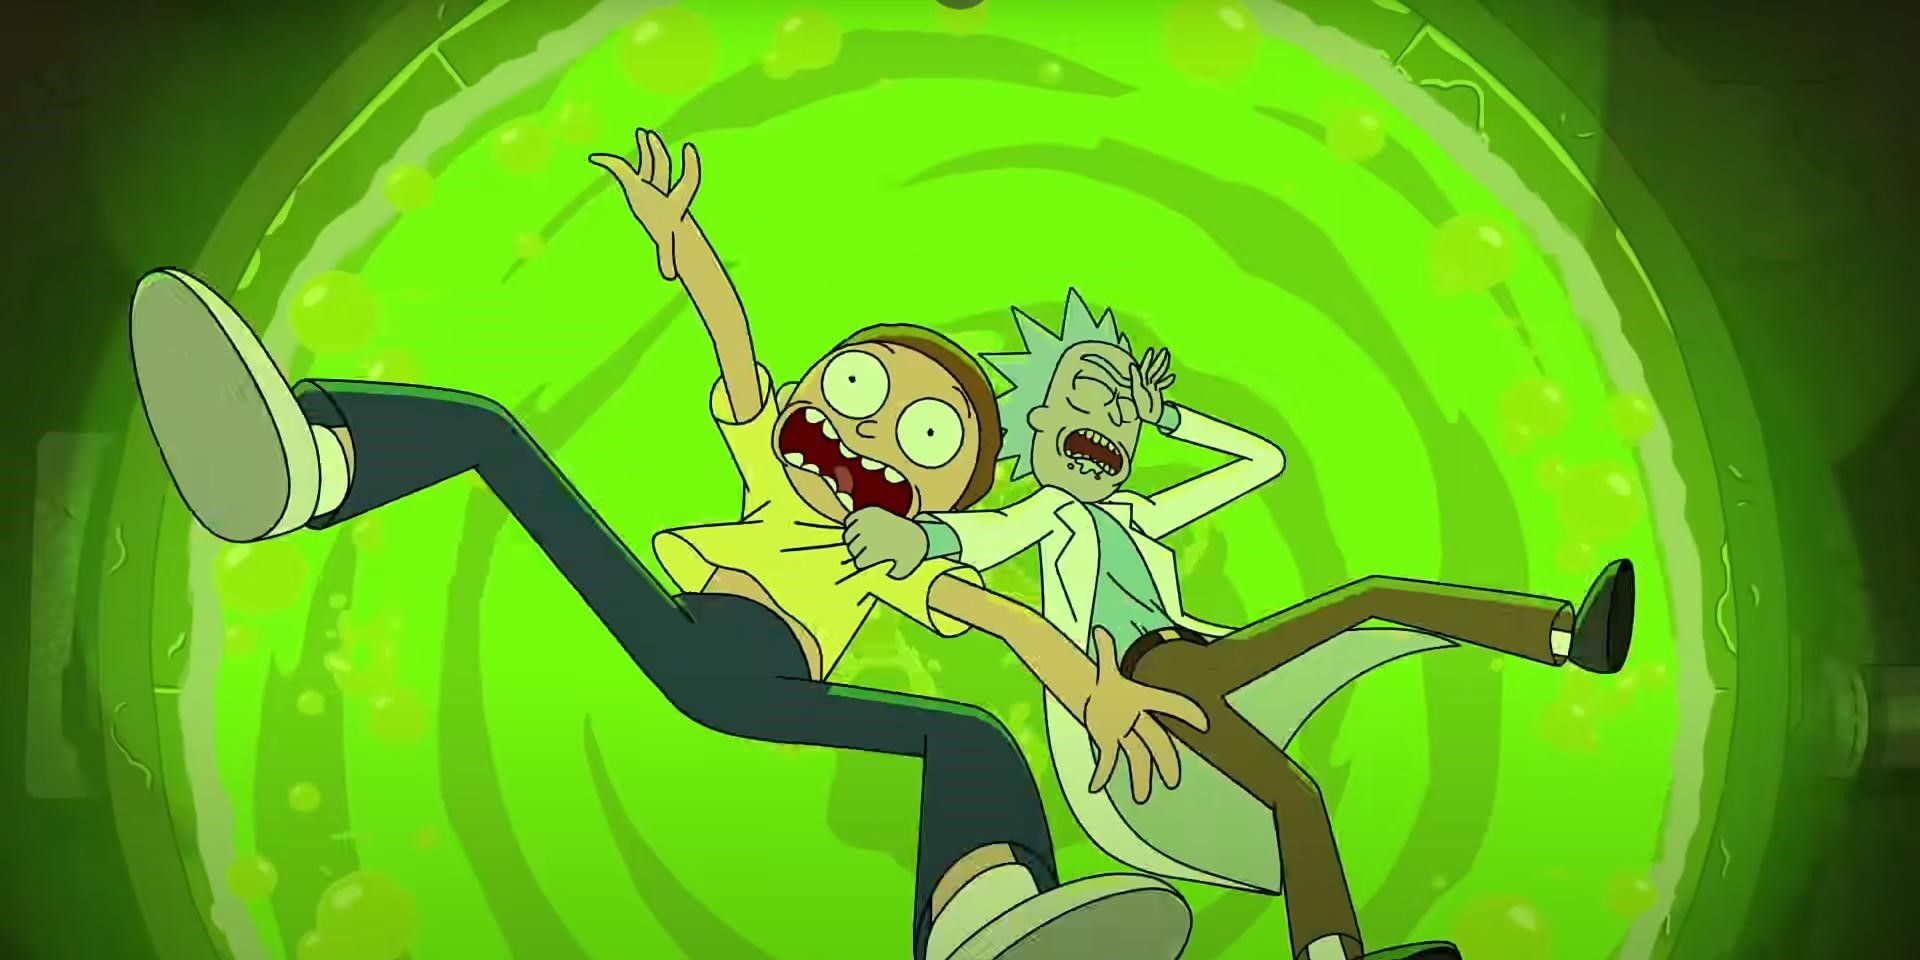 Rick and Morty falling into a vat of acid.